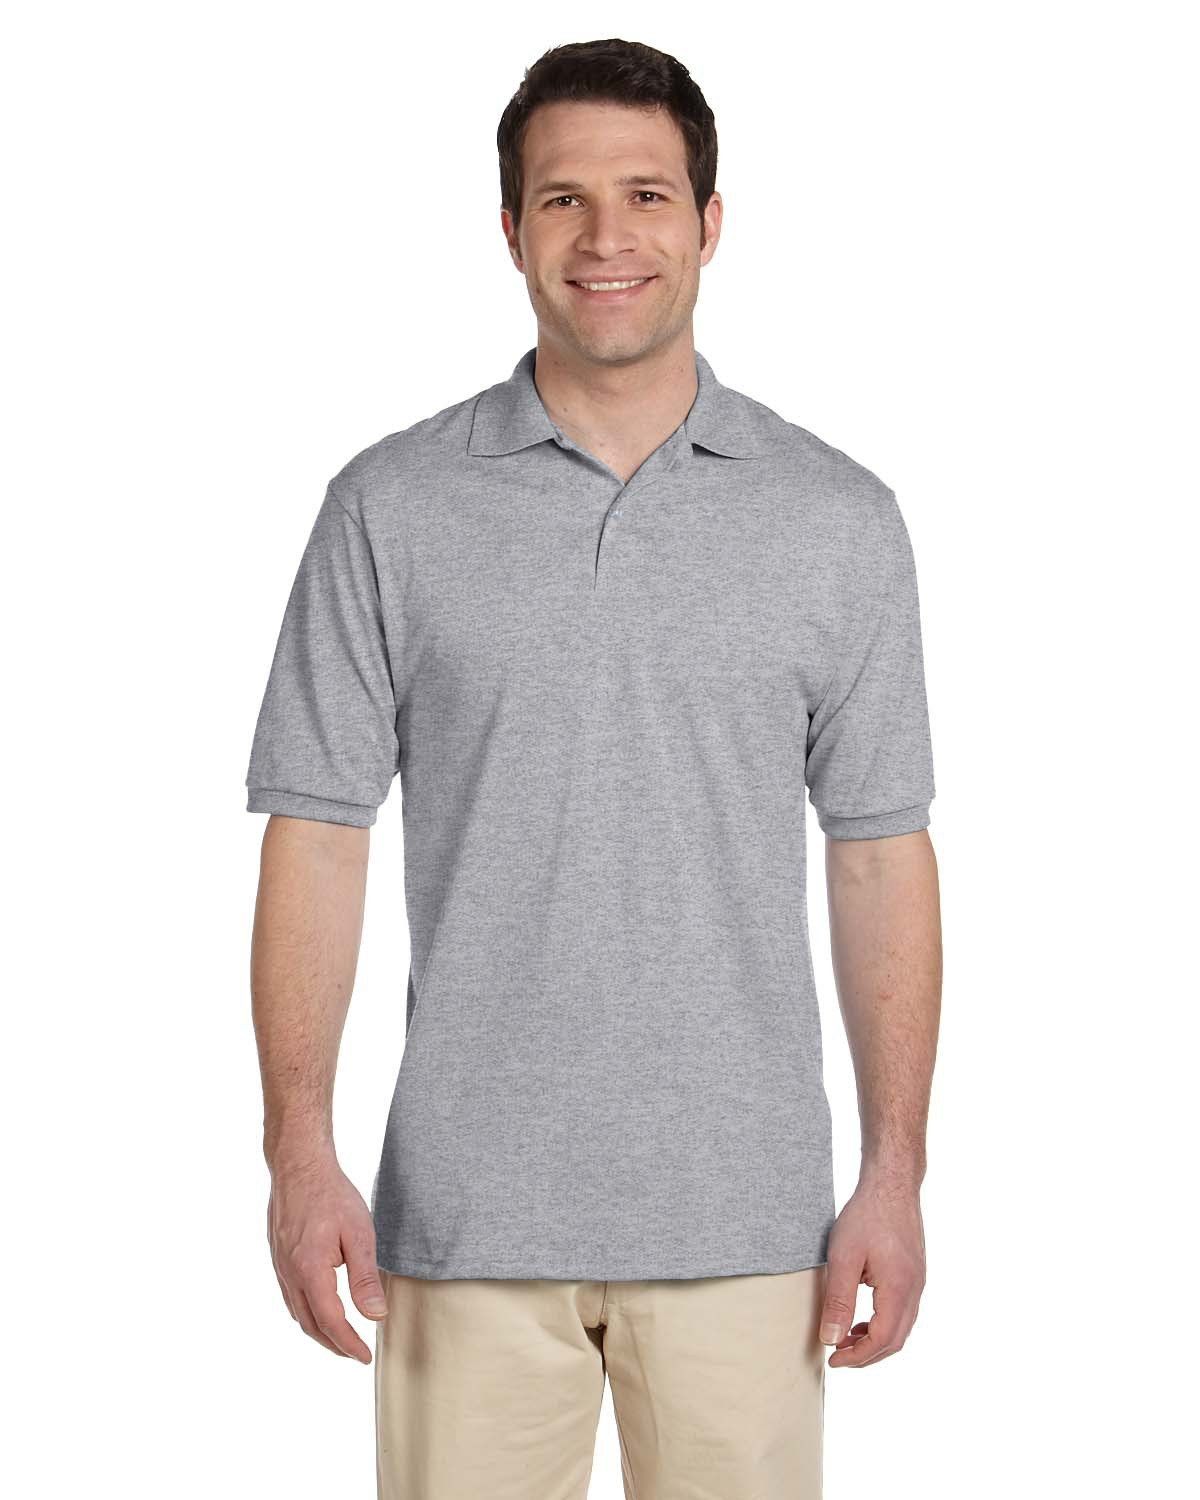 Men's Polo- Spotshield Jersey sport repels water and oil-based stains